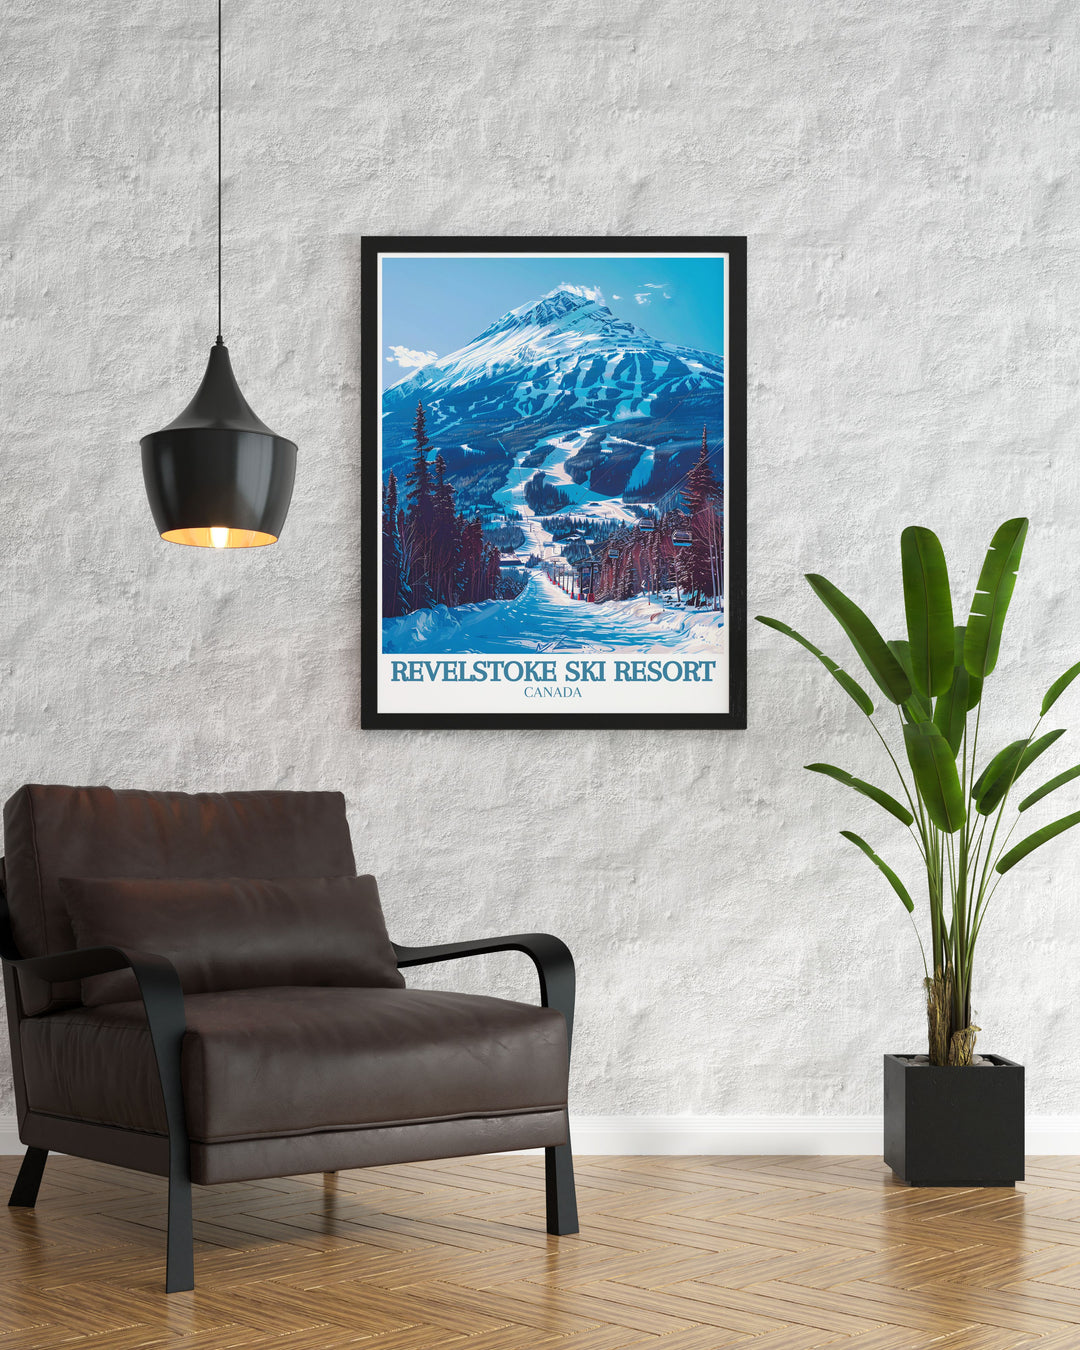 Ski Resort Print featuring Mount Mackenzie and the Revelation Gondola cable car. This artwork captures the thrill of skiing in Revelstoke Canada. Ideal for enhancing any space with a touch of British Columbias breathtaking scenery.